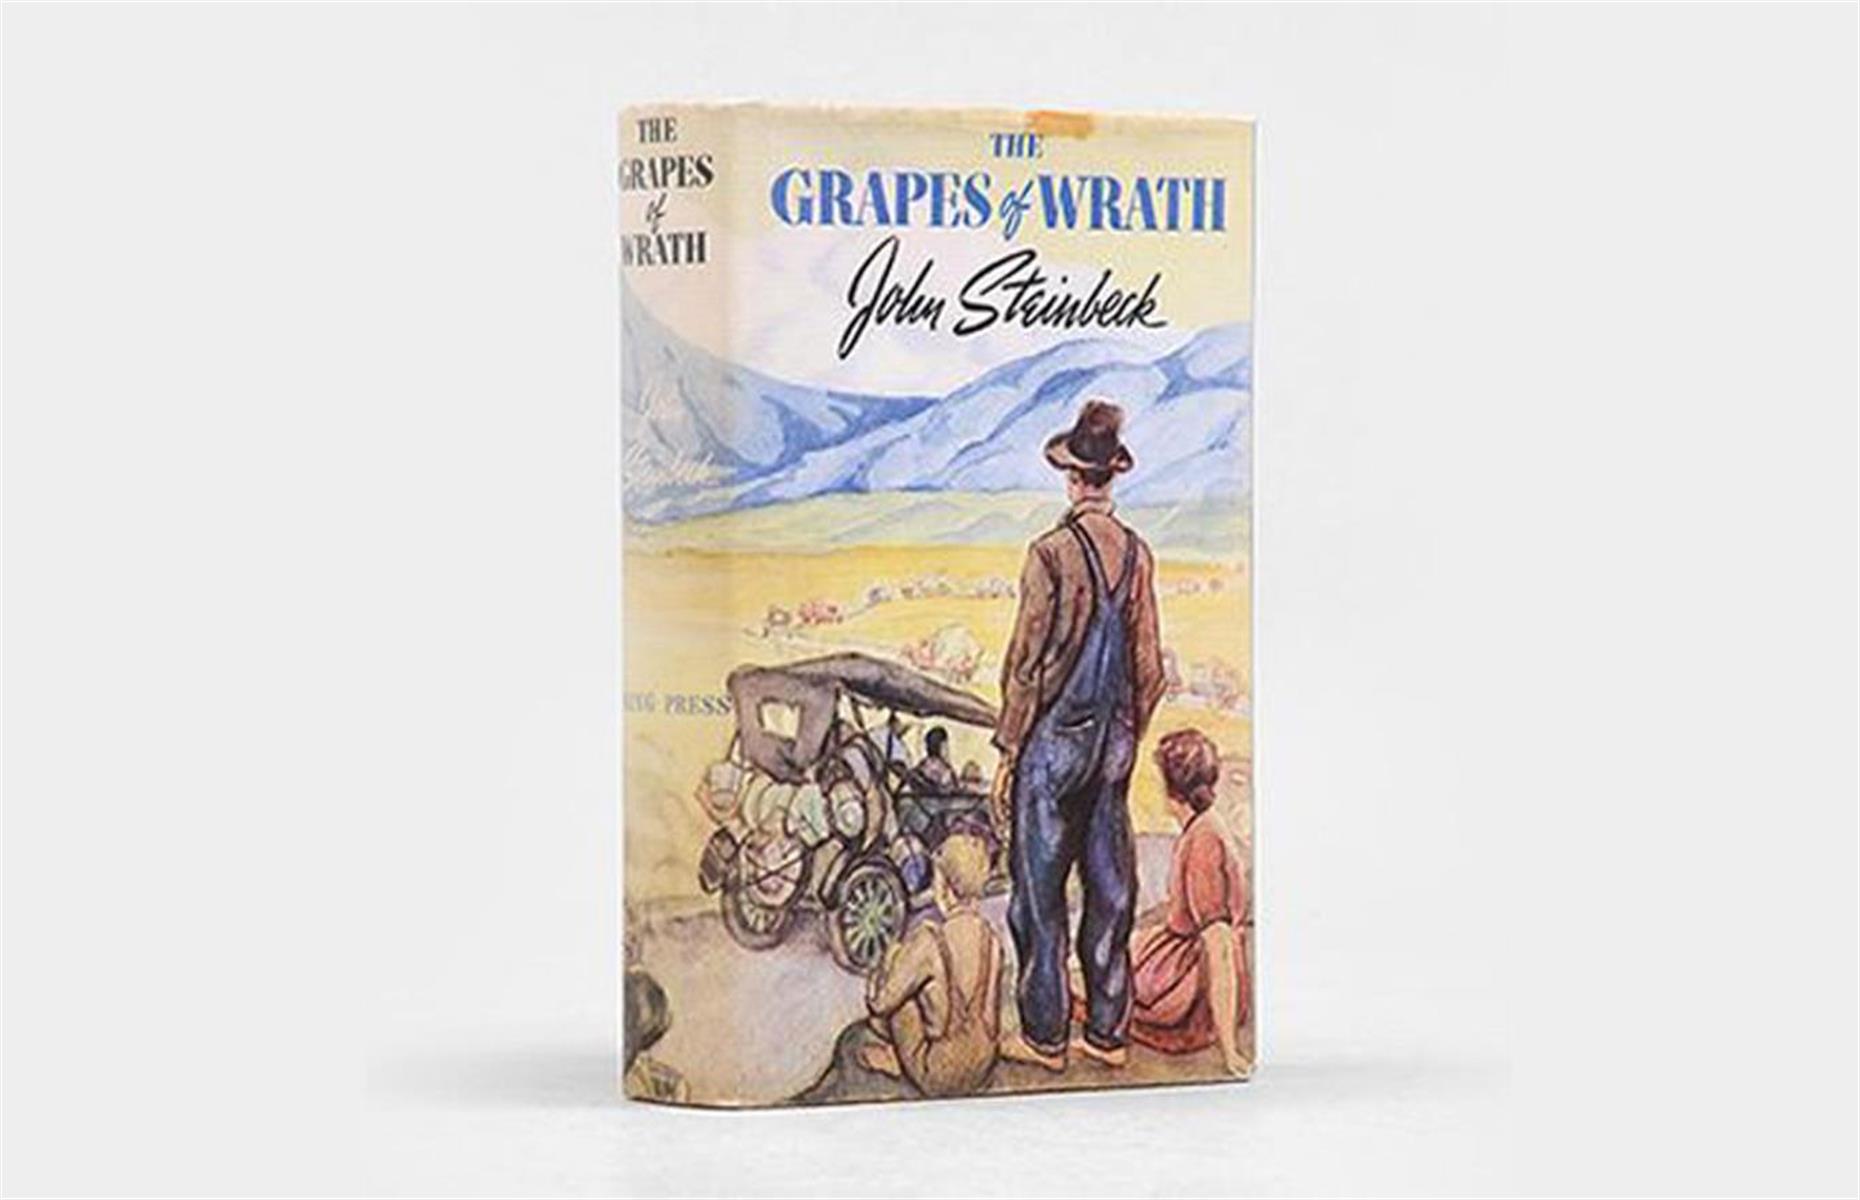 The Grapes of Wrath: up to $32,000 (£25,000)